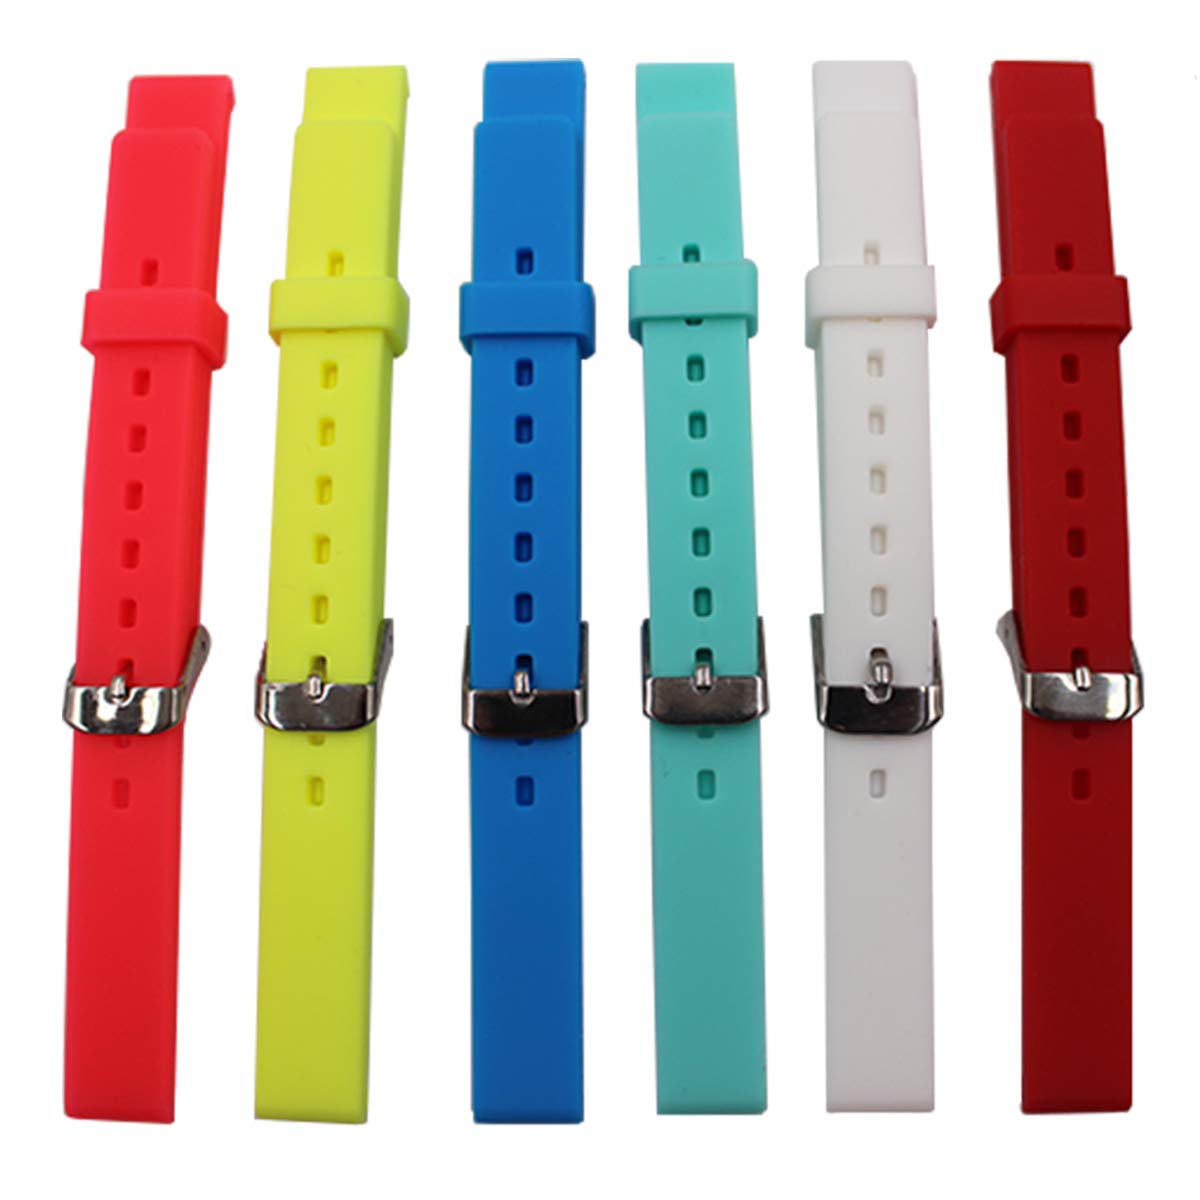 KHZBS Children's Candy Color Silicone Watch Band Waterproof Rubber Strap 12mm